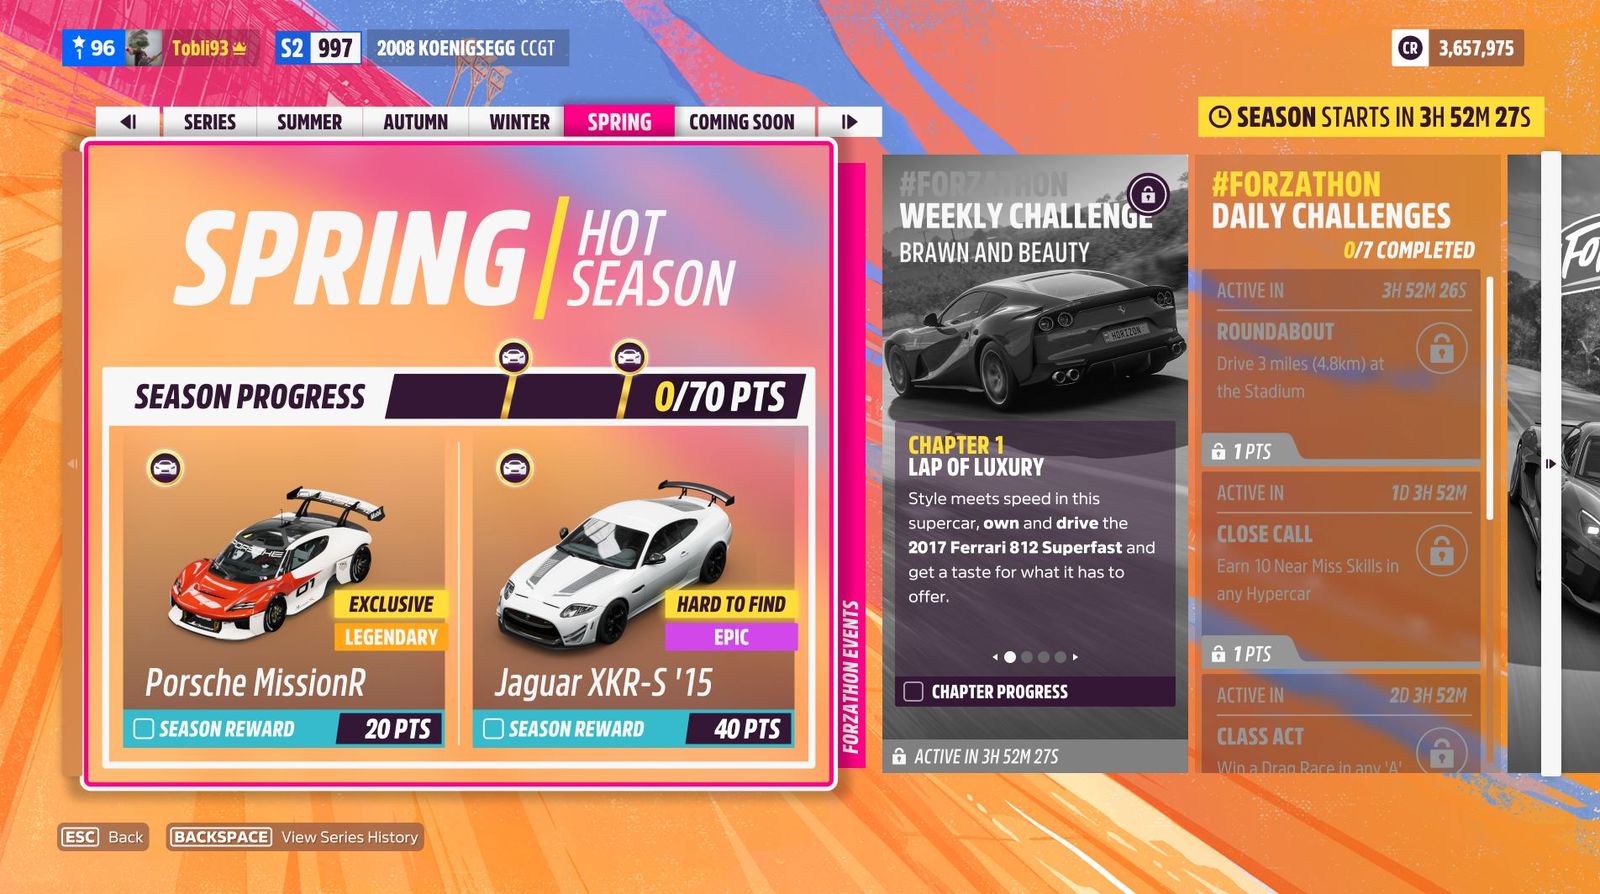 the Season Progress cars you can win in the High Performance Spring festival playlist